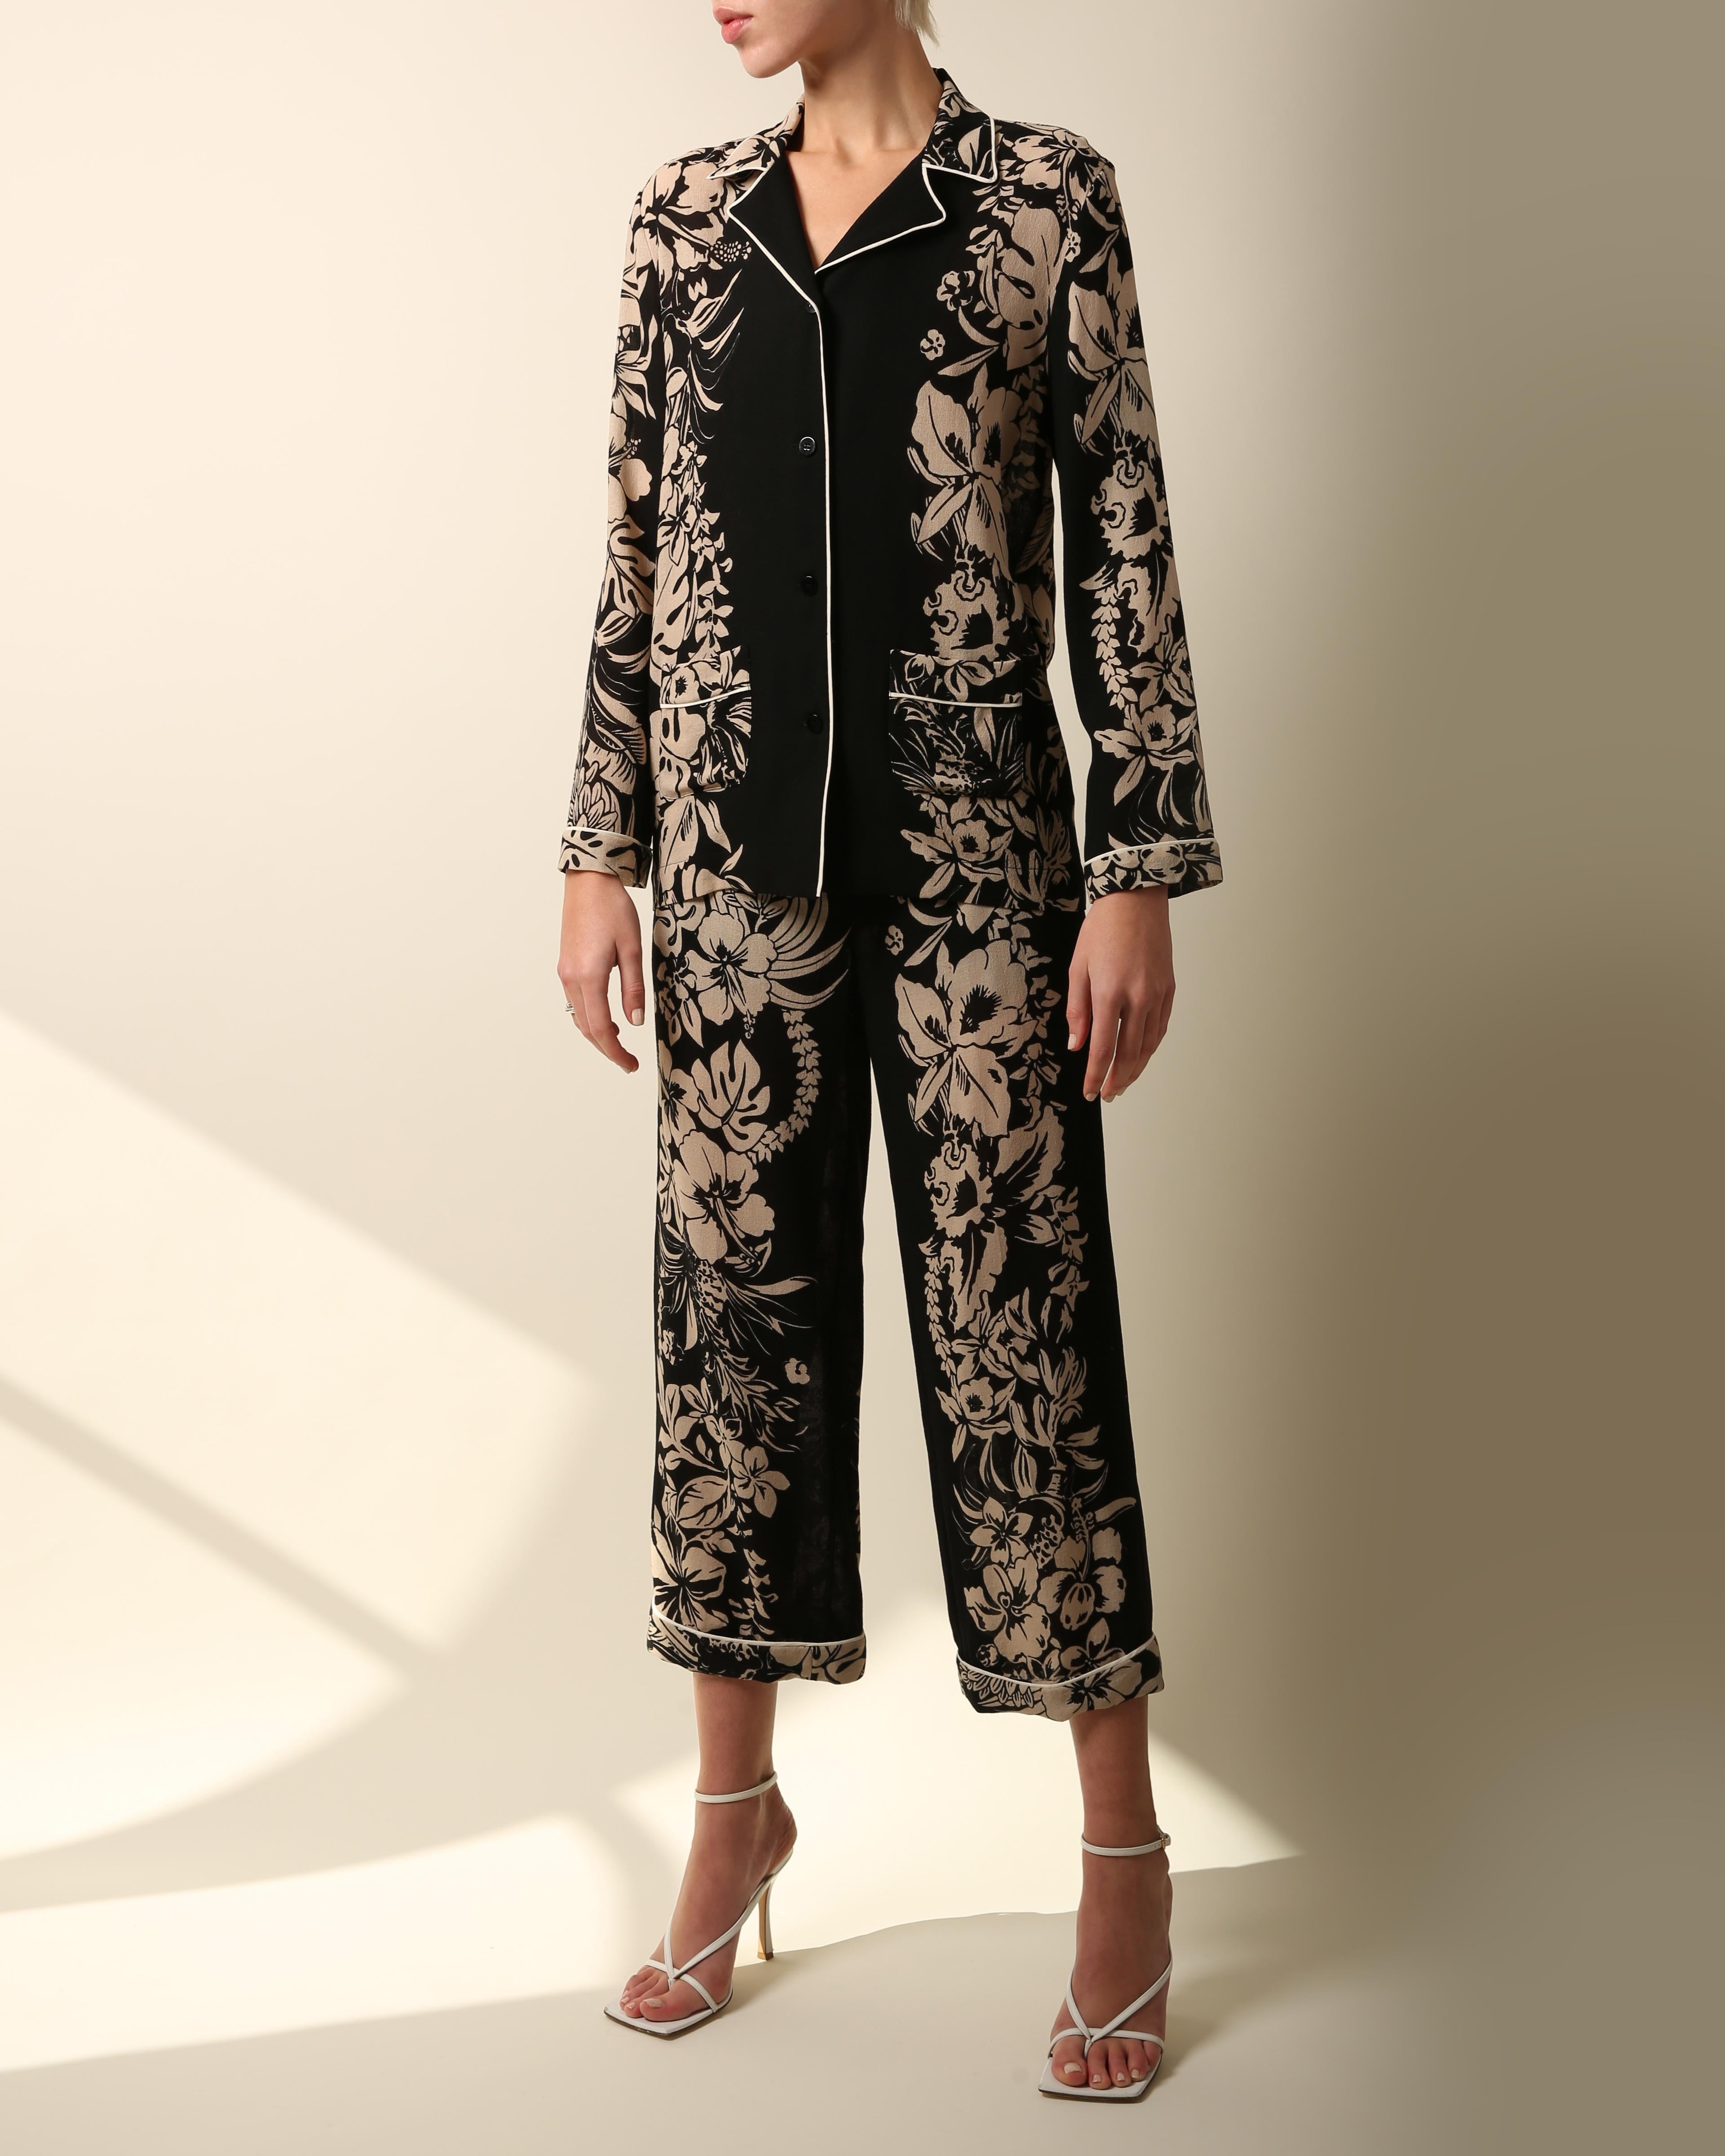 A beautiful two piece set by Valentino consisting of a button up blouse and wide leg turned up pants
Loose fitting pyjama style 
Black and nude floral print with white piping
Two pockets to the blouse that is cut for an oversized fit
Zip and hook